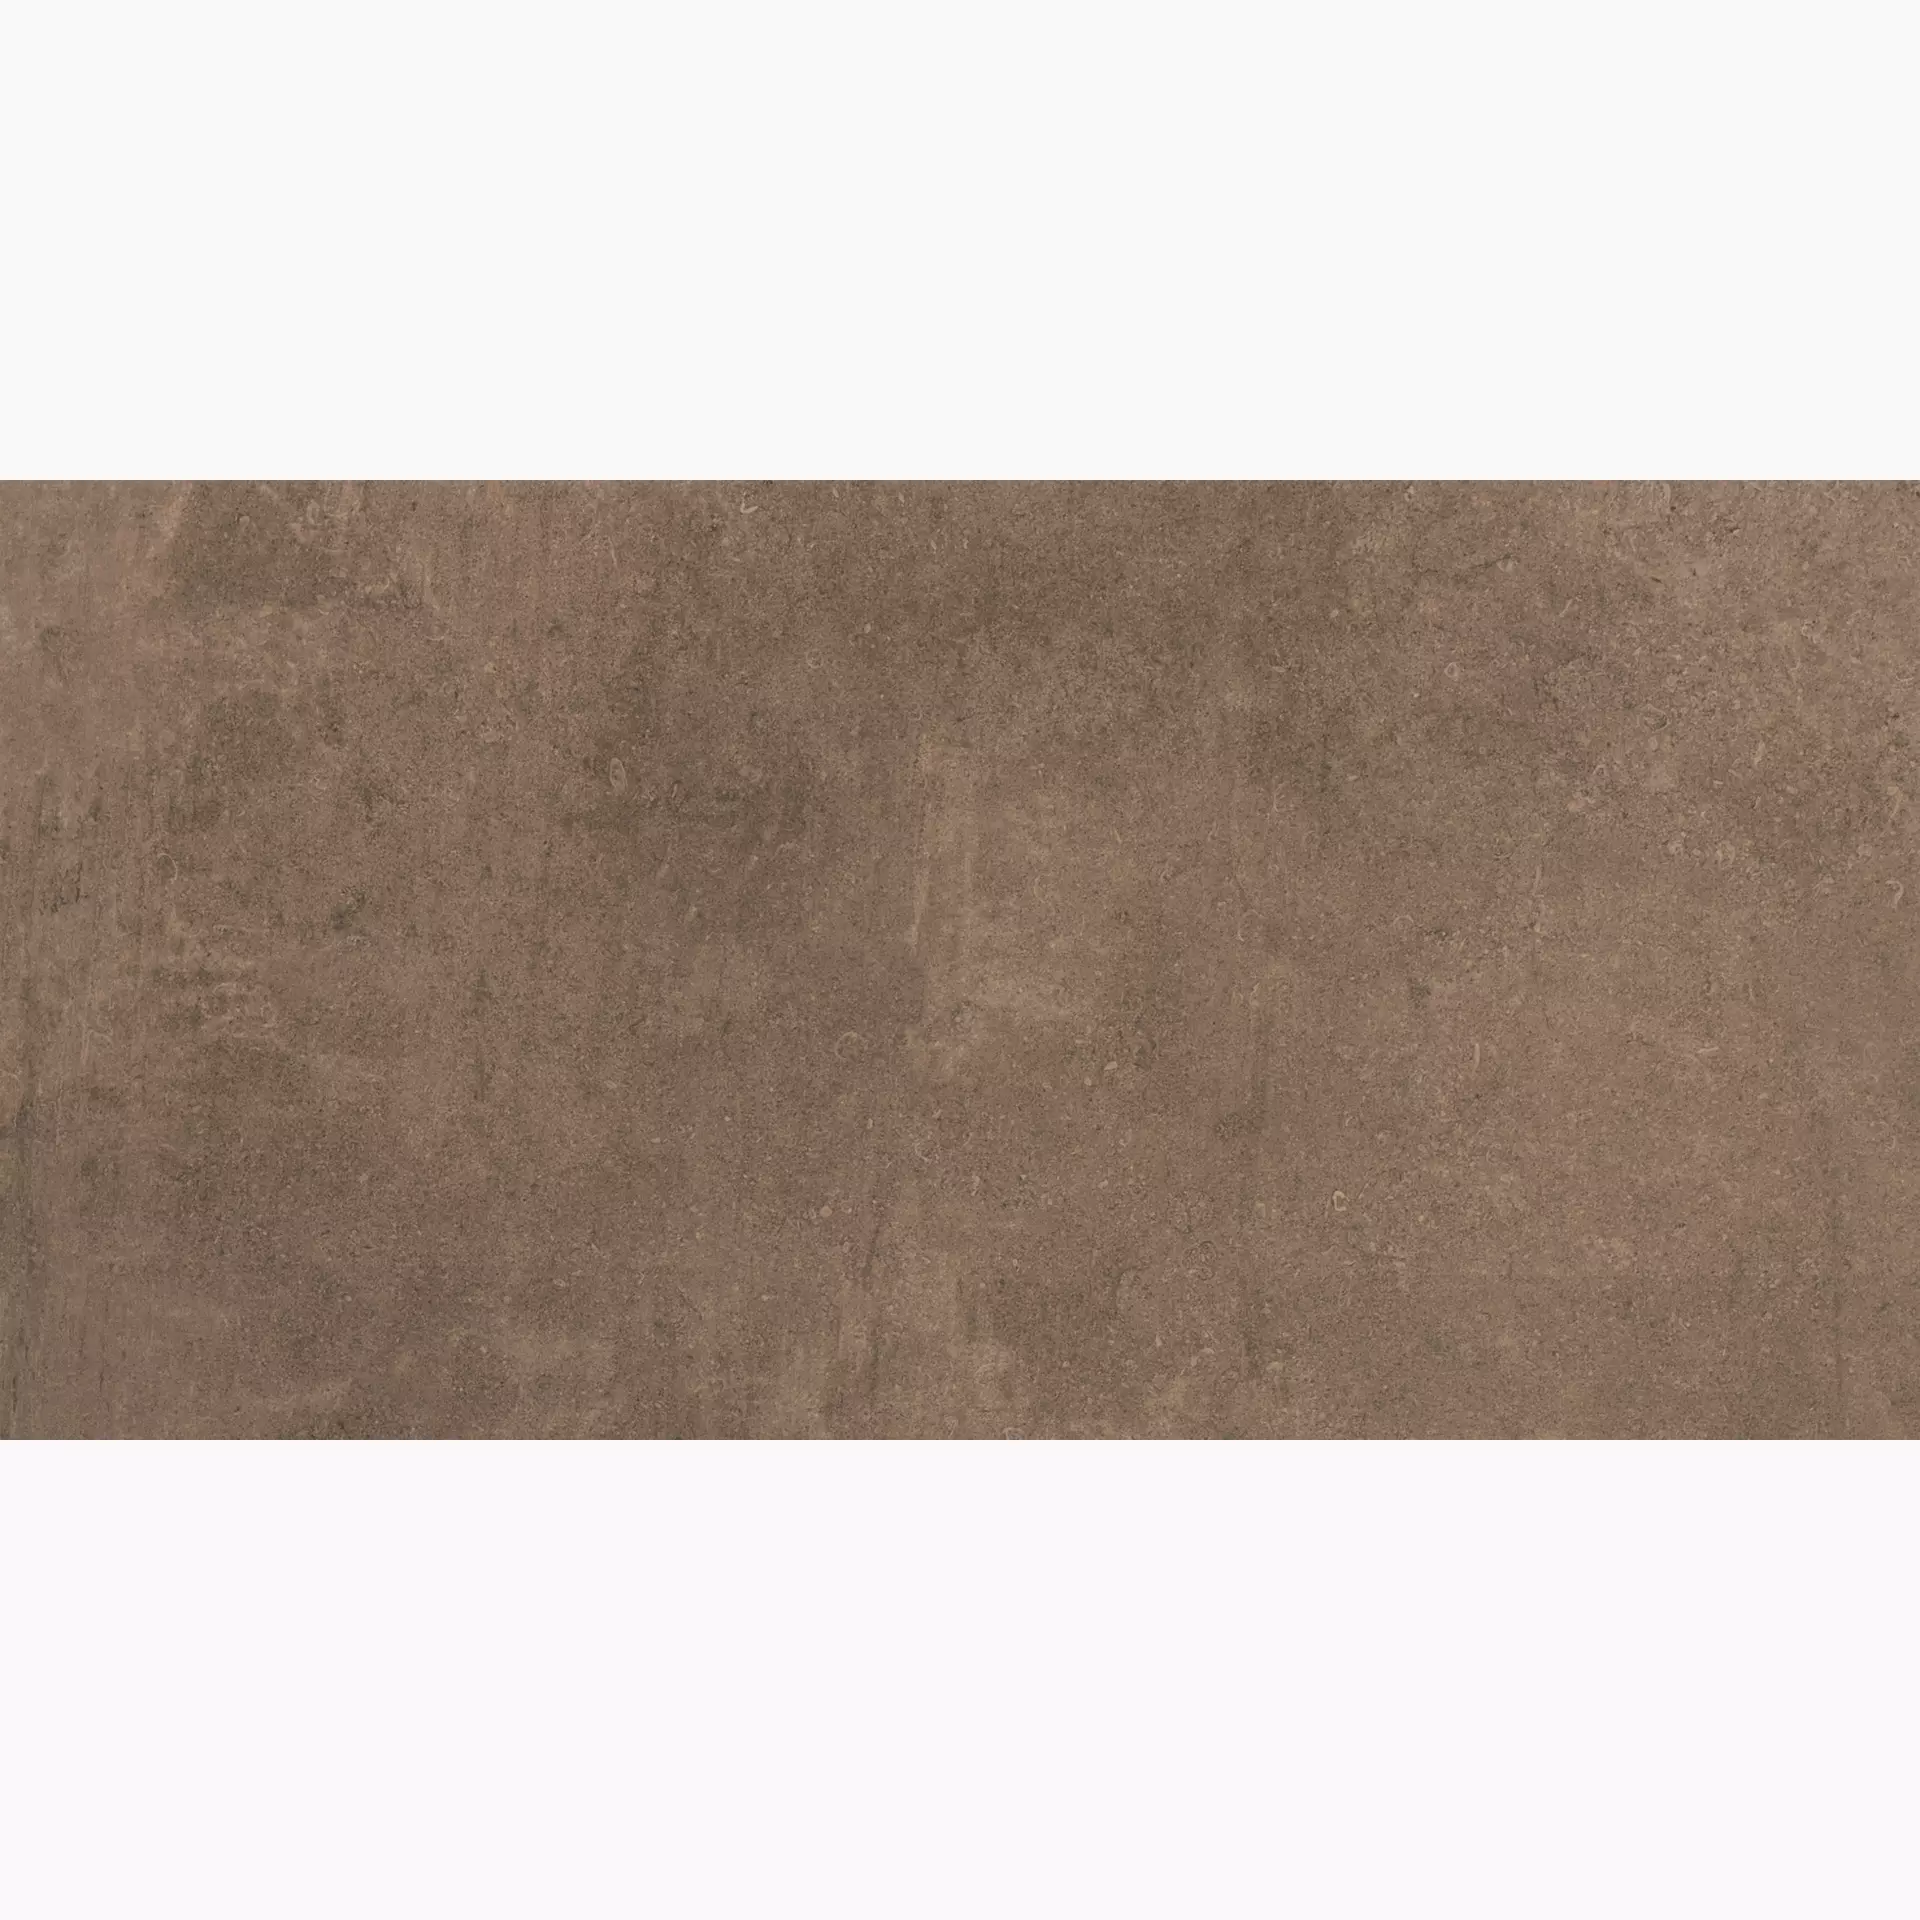 Refin Bricklane Umber Naturale NF28 30x60cm rectified 9mm